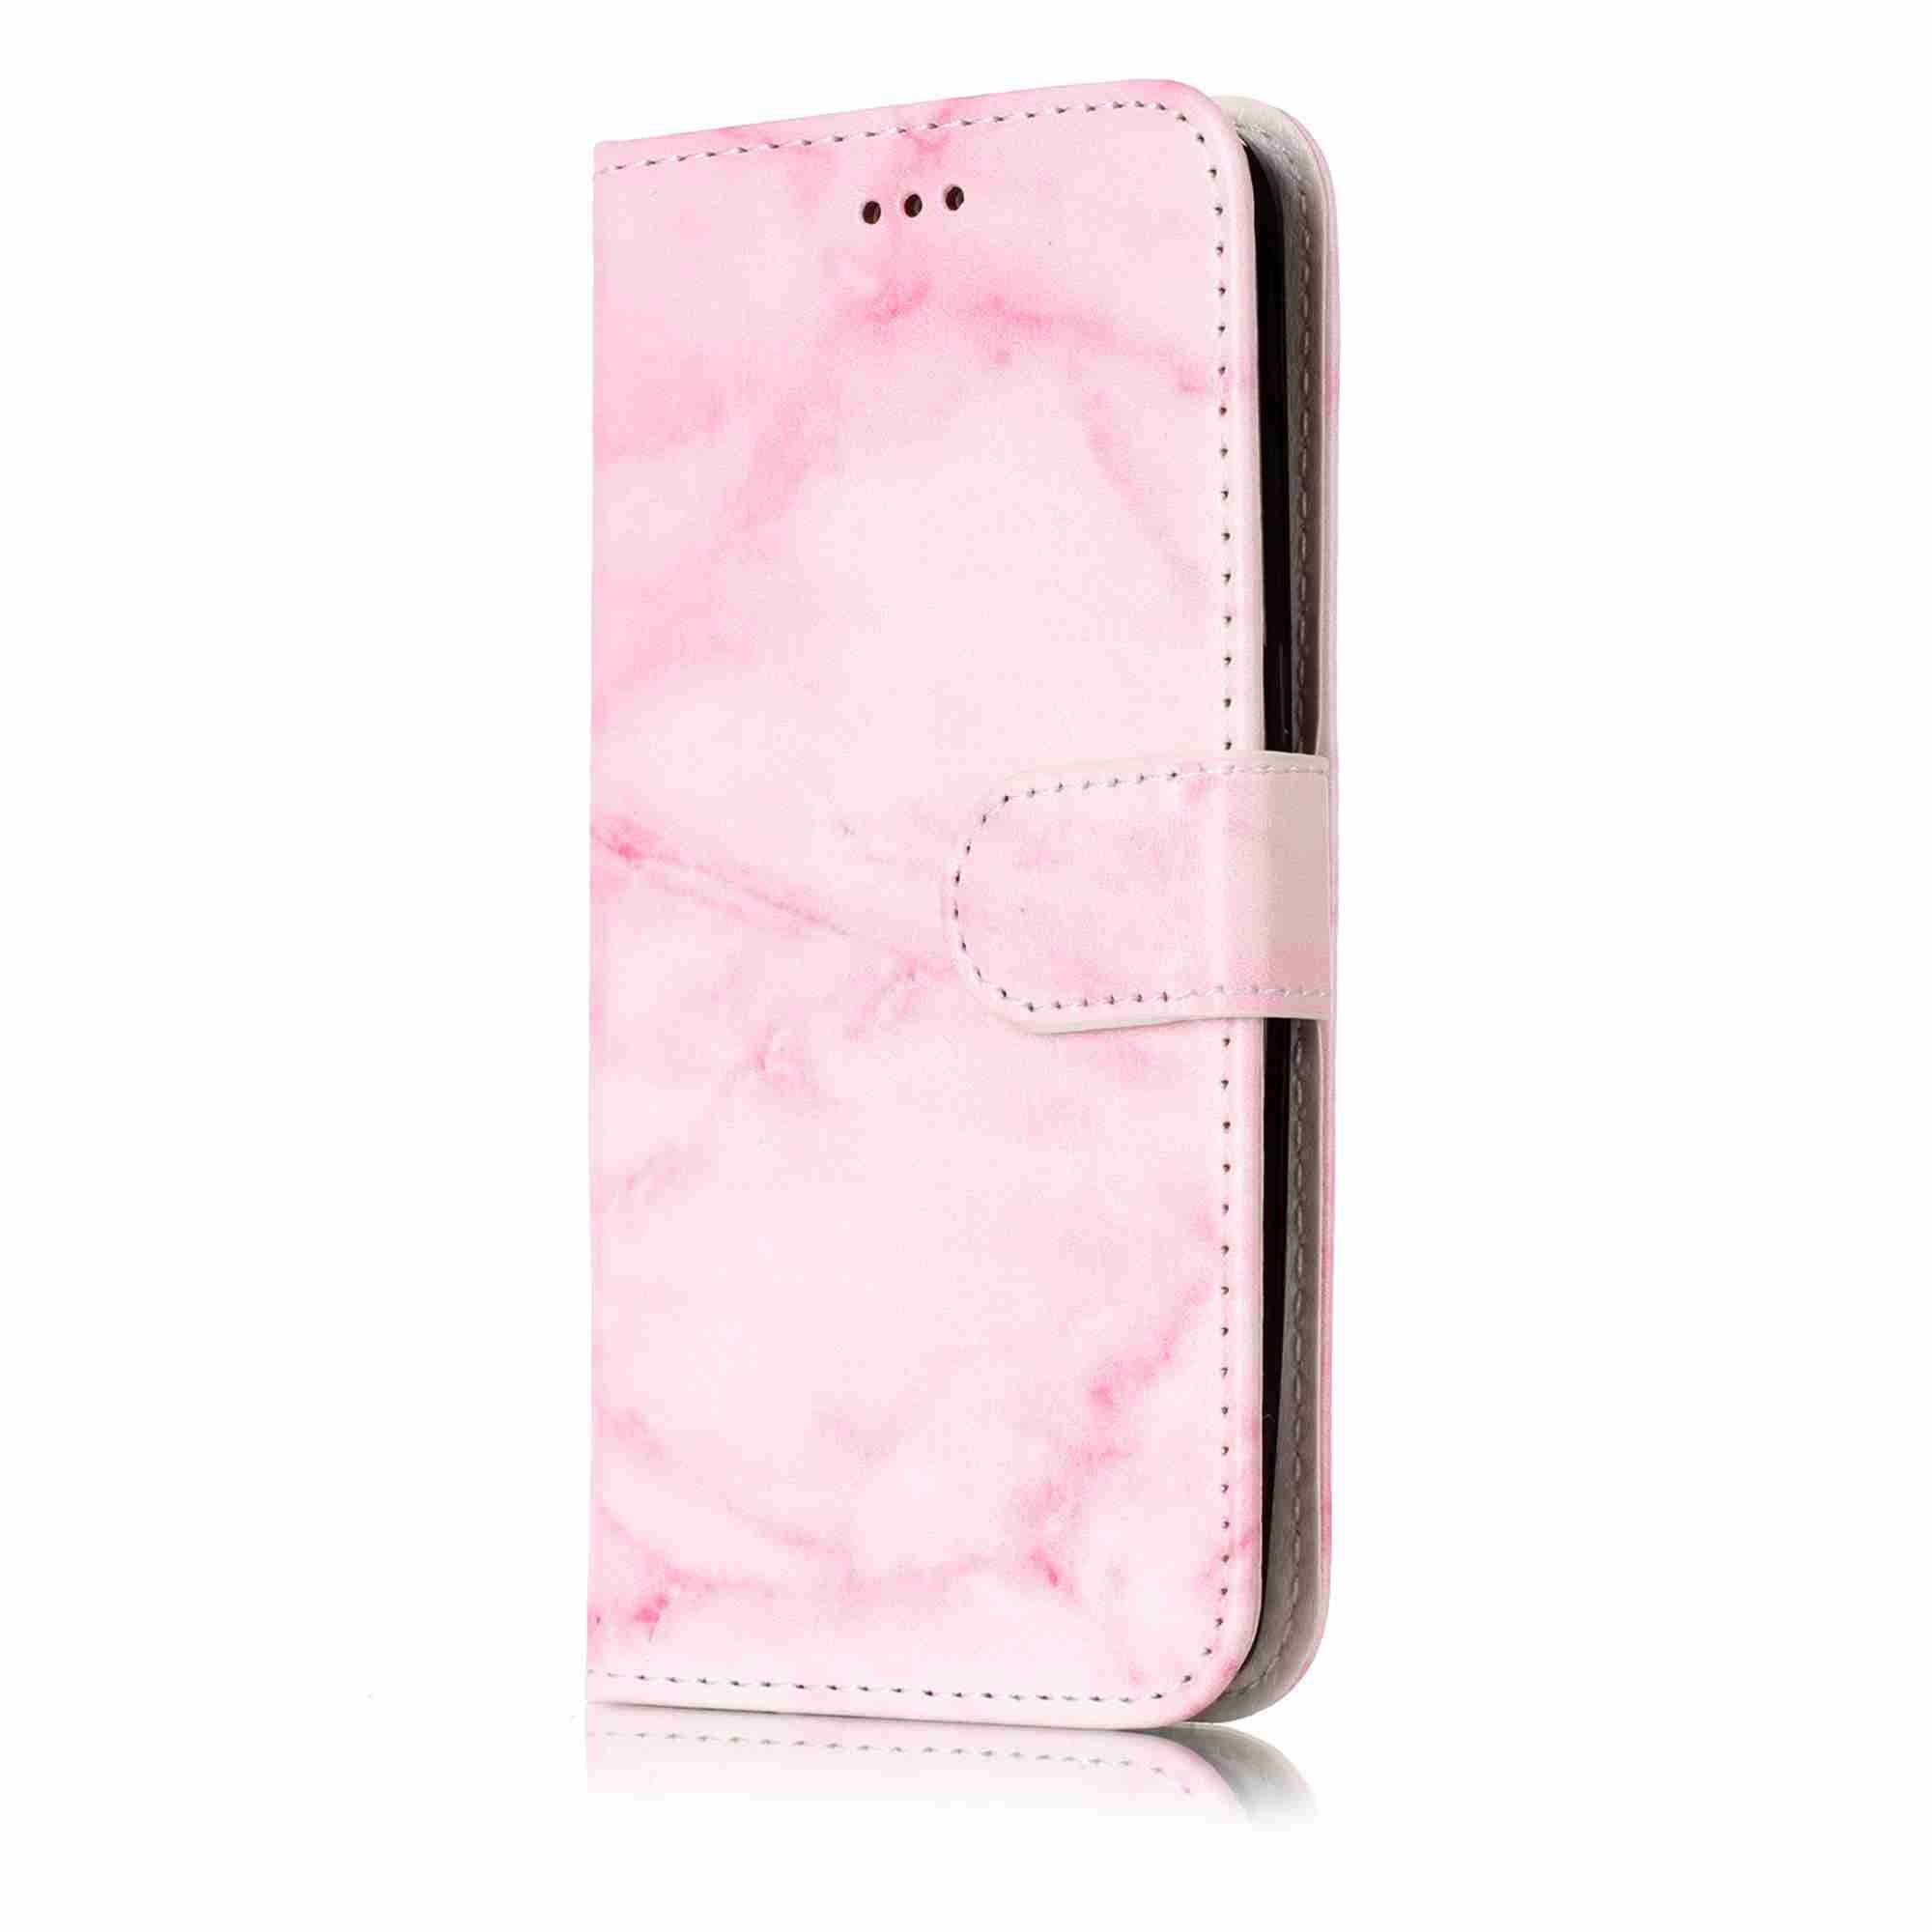 Laboratorium Zijdelings Iets Dteck Case For Samsung Galaxy S8 Plus, [Kickstand Feature] Luxury PU  Leather Wallet Case Flip Folio Cover with [Card Slots] and [Note Pockets],  Pink - Walmart.com